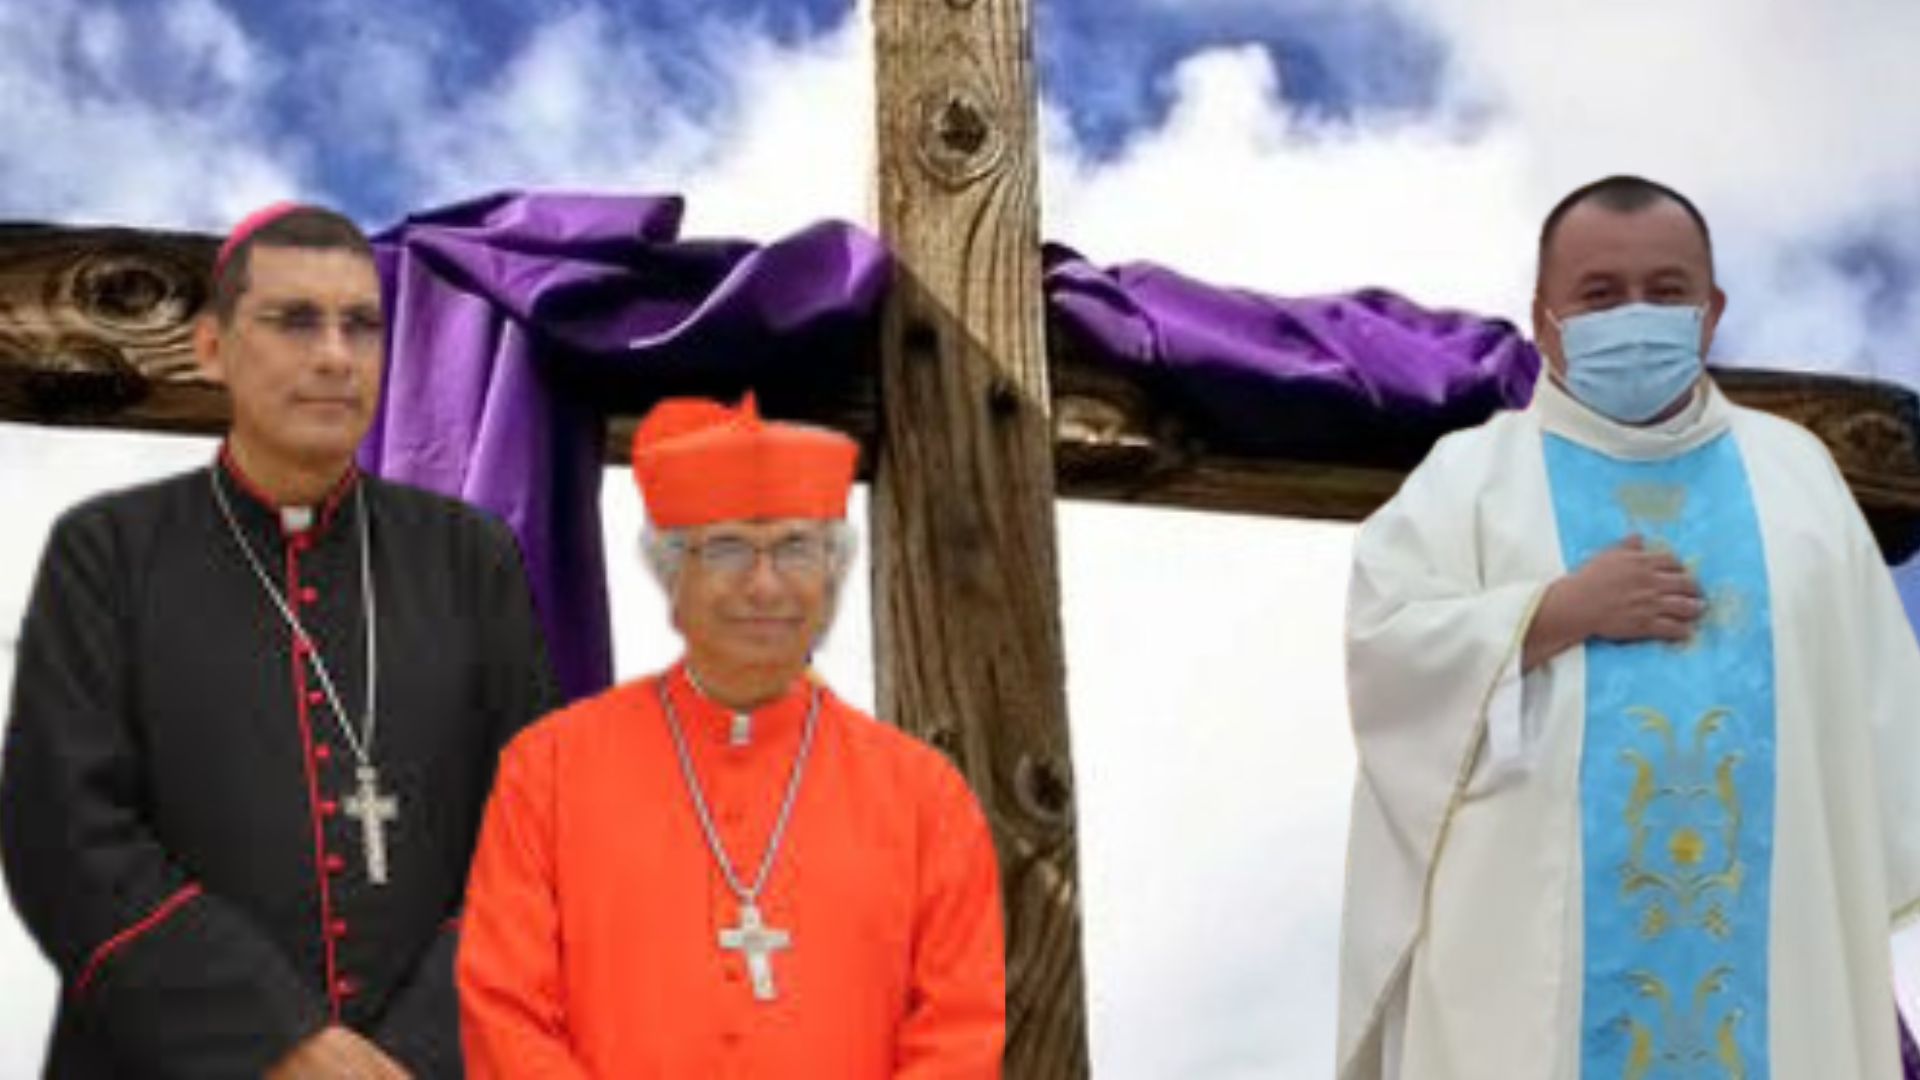 Church breaks the silence and asks for prayers for priests imprisoned by the dictatorship